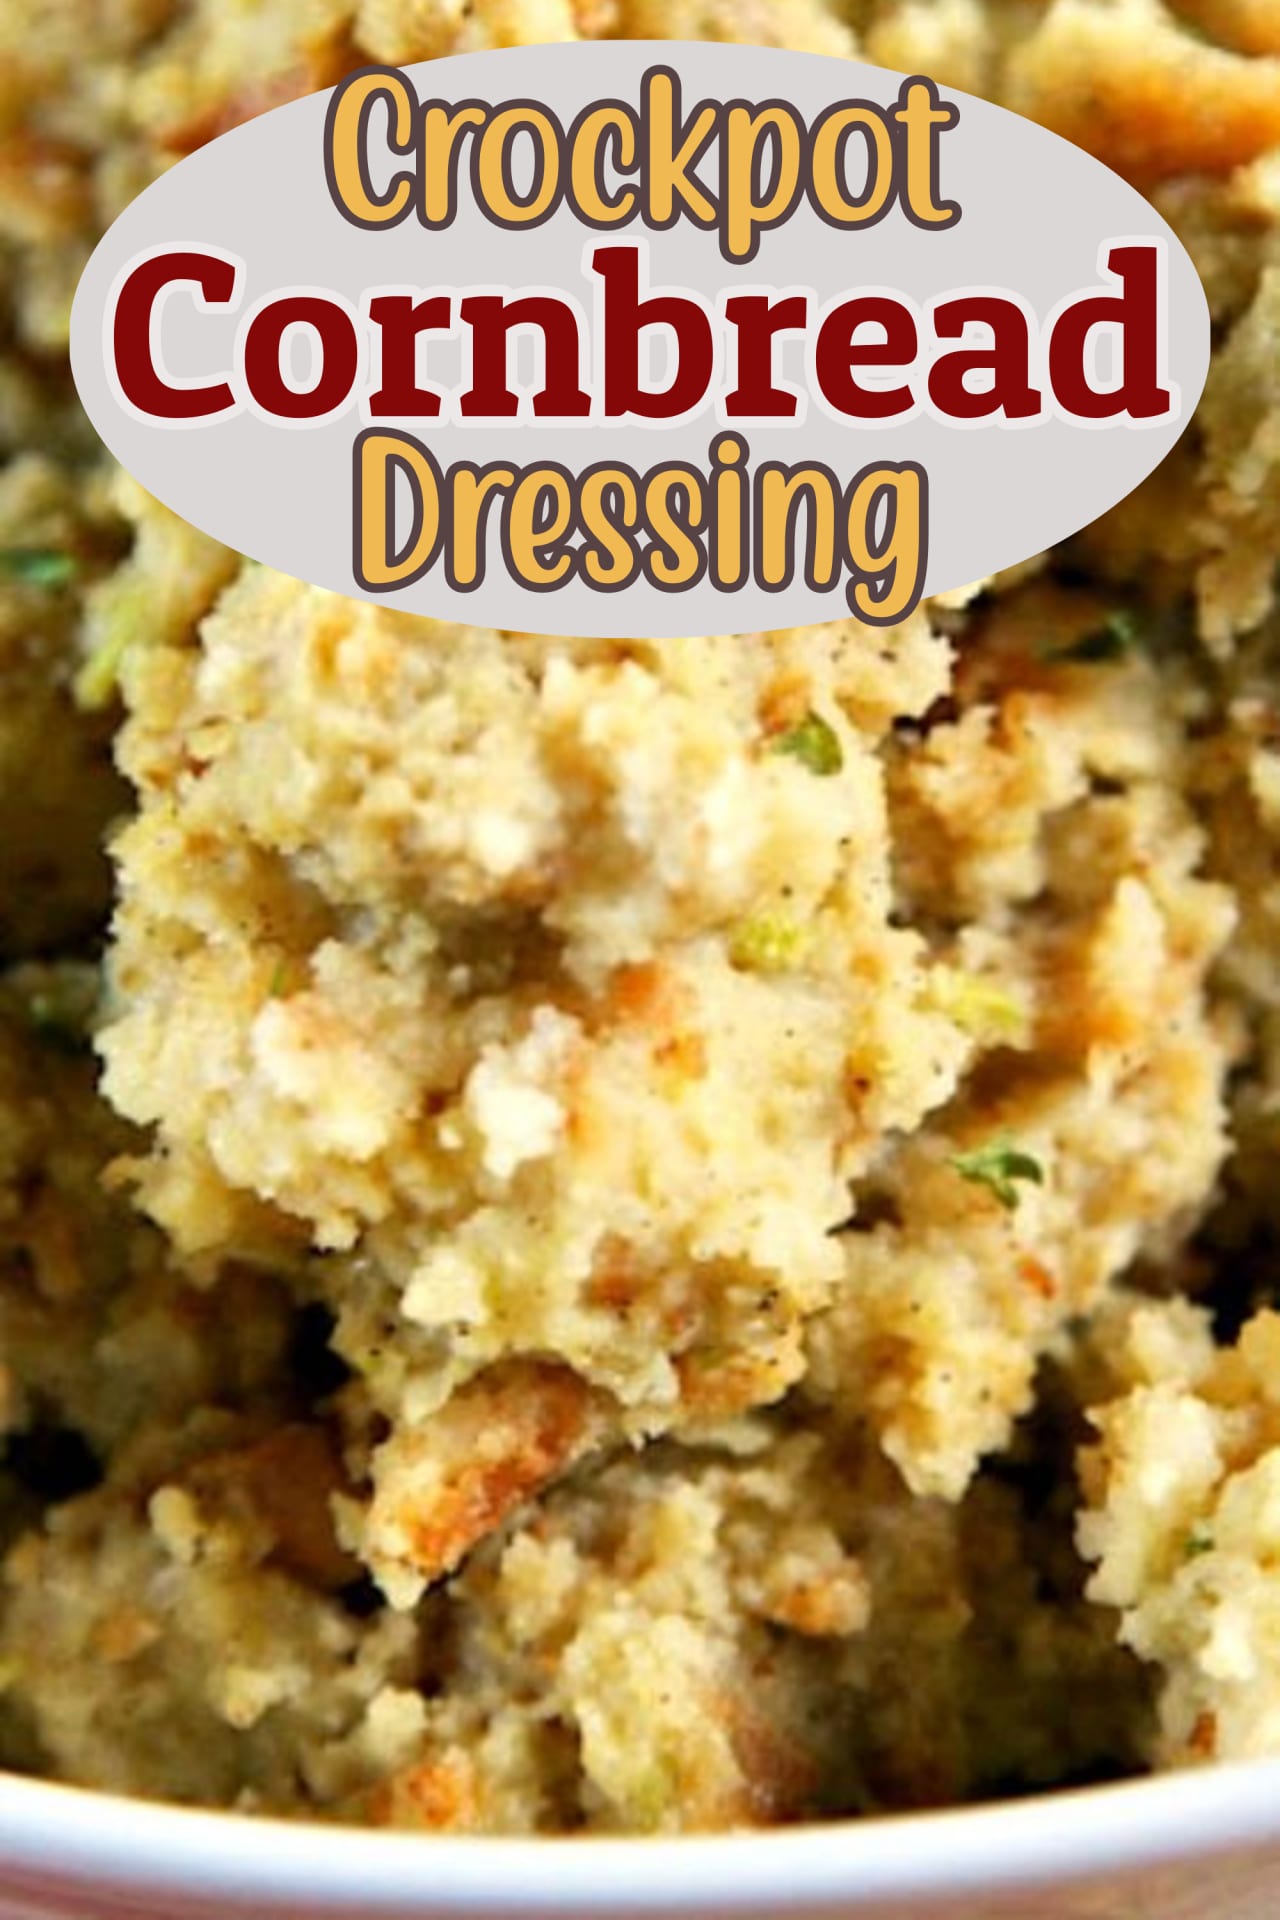 Crock pot slow cooker side dishes - easy side dishes you can make ahead in your crowckpot slow cooker - easy thanksgiving side dishes - cornbread dressing stuffing for cheap Thanksgiving side dishes for a crowd